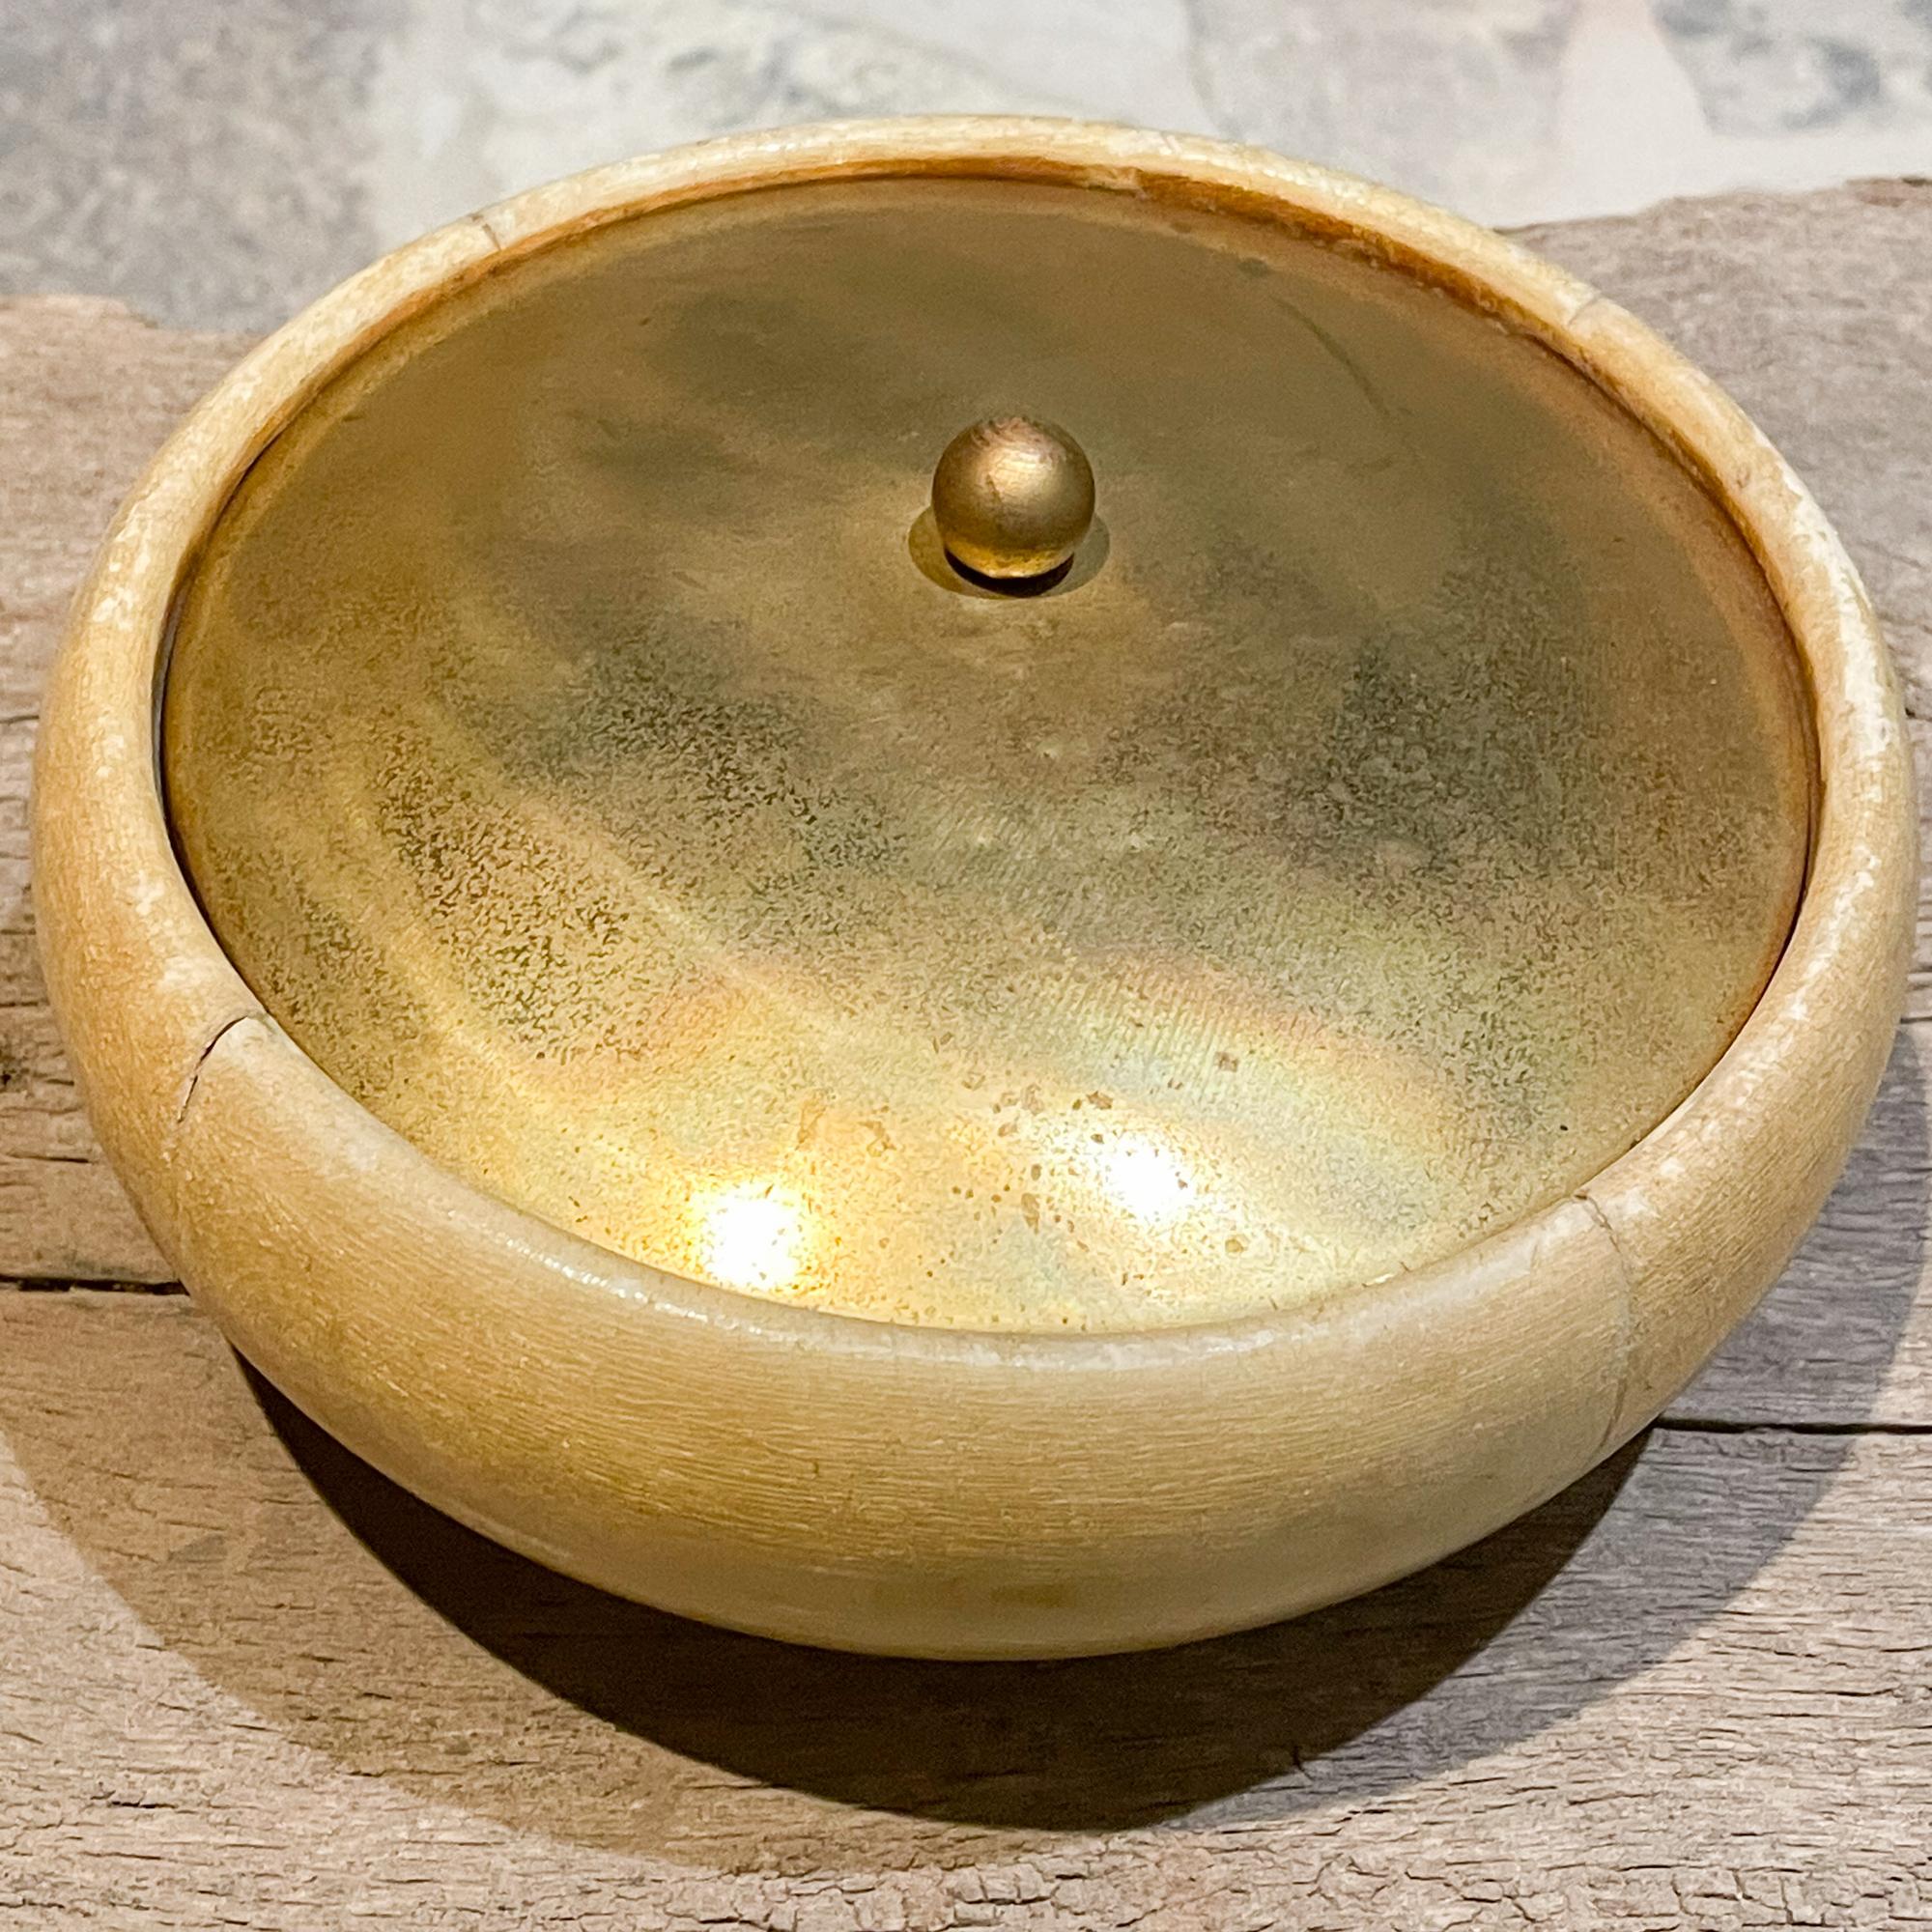 1940s covered dish in lacquered goatskin, parchment and brass.
Aldo Tura made in Italy by Macabo Cusano
2.75 x 6.75
Original vintage condition, unrestored finish with patina present. 
Some areas of lacquer have worn out, providing unique